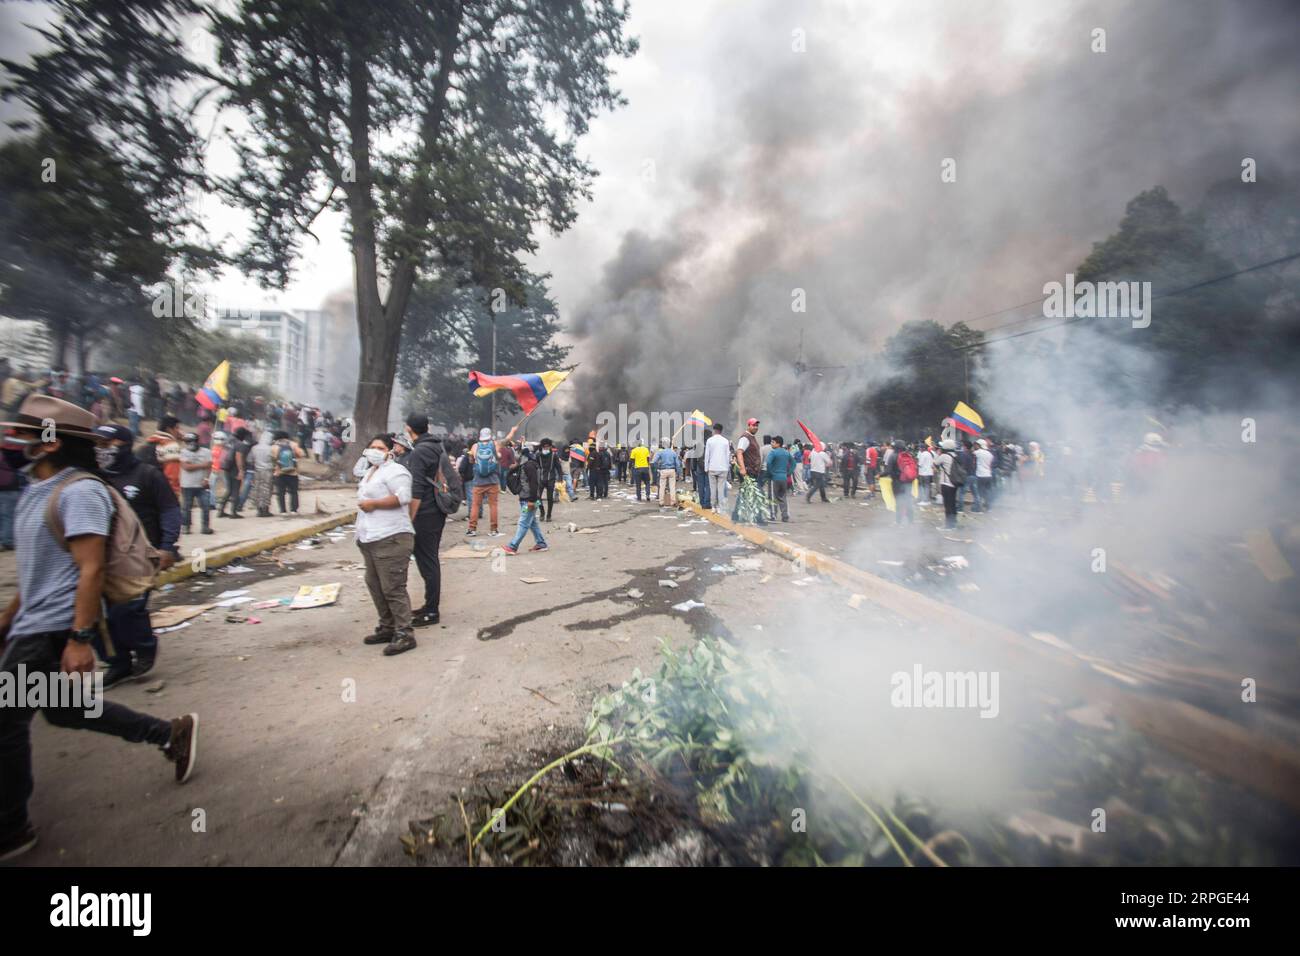 191013 -- QUITO, Oct. 13, 2019 -- Demonstrators participate in a protest in Quito, Ecuador, on Oct. 12, 2019. Ecuadorian President Lenin Moreno declared curfew and militarization of the Metropolitan District of Quito on Saturday after 10 days of anti-government protests. TO GO WITH:Ecuadorian president orders curfew, militarization in Quito ECUADOR-QUITO-LENIN MORENO-DECLARATION HaoxYunfu PUBLICATIONxNOTxINxCHN Stock Photo